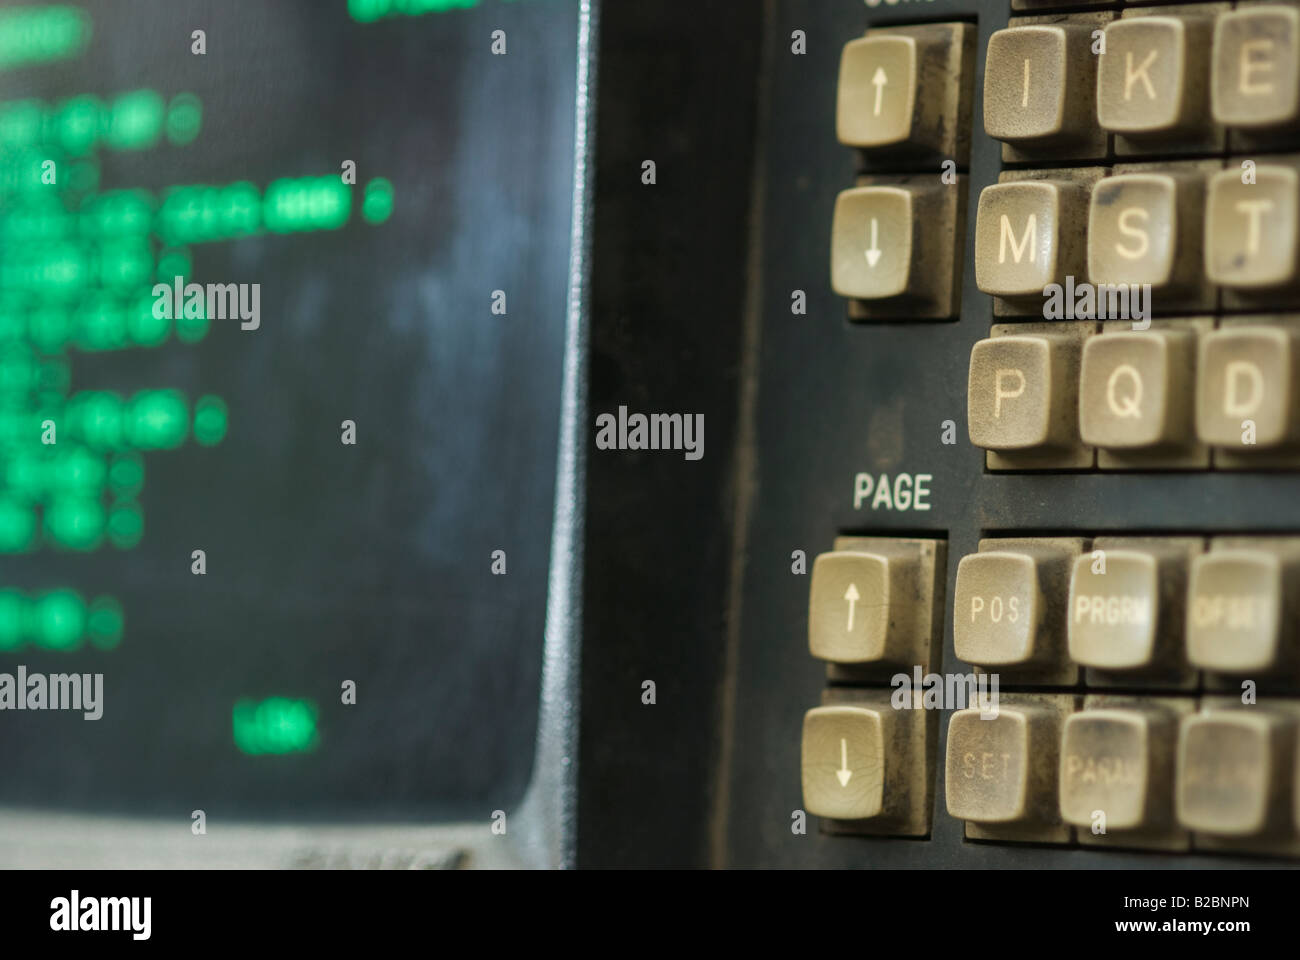 Keypad and monitor of old worn numerical control metalworking lathe Stock Photo